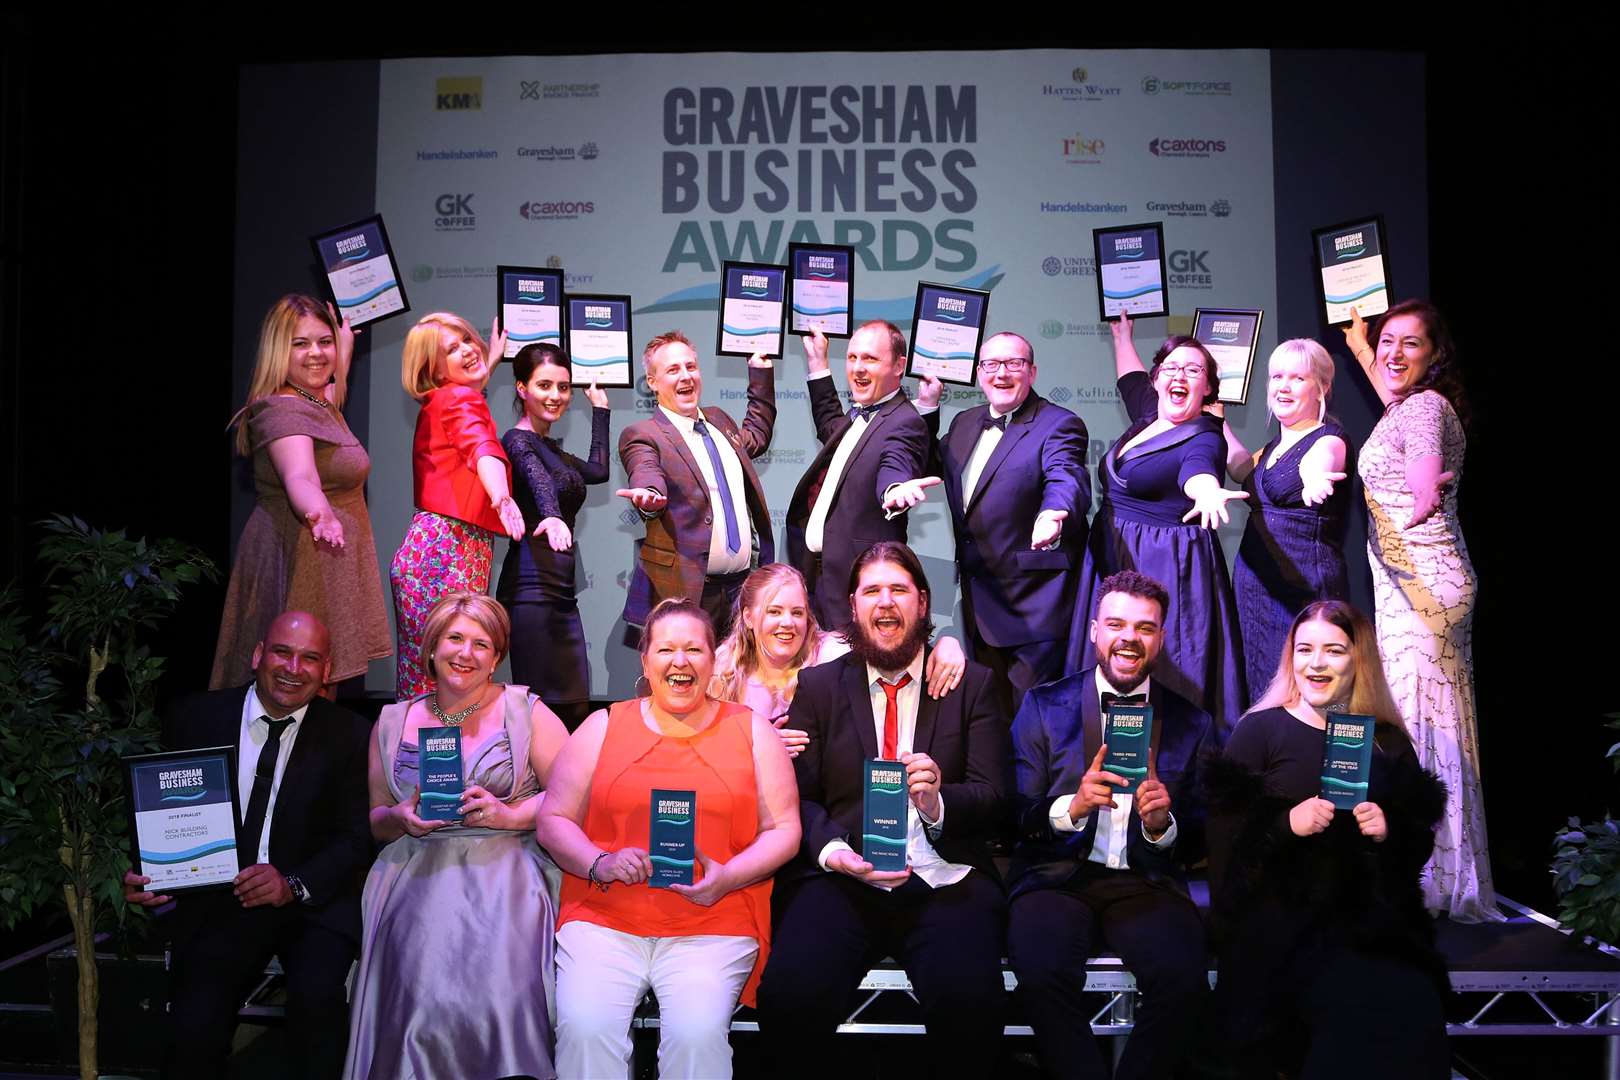 All the finalists and winners from the Gravesham Business Awards 2018